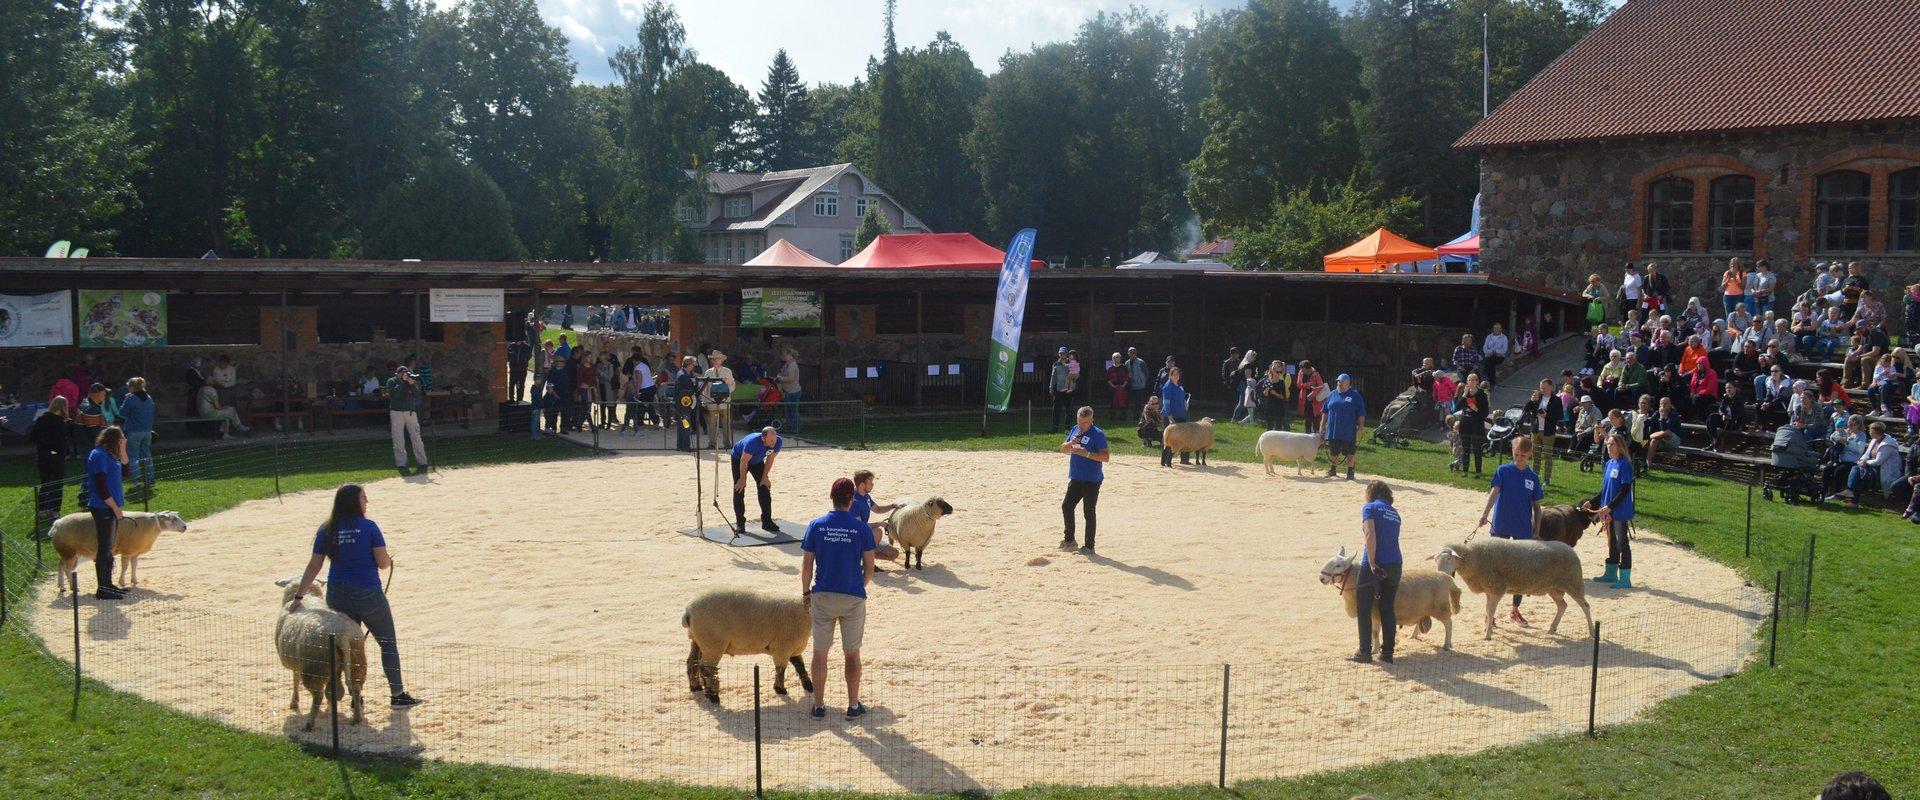 Estonian Agricultural Museum, event Thoroughbred, sheep competing in the competition